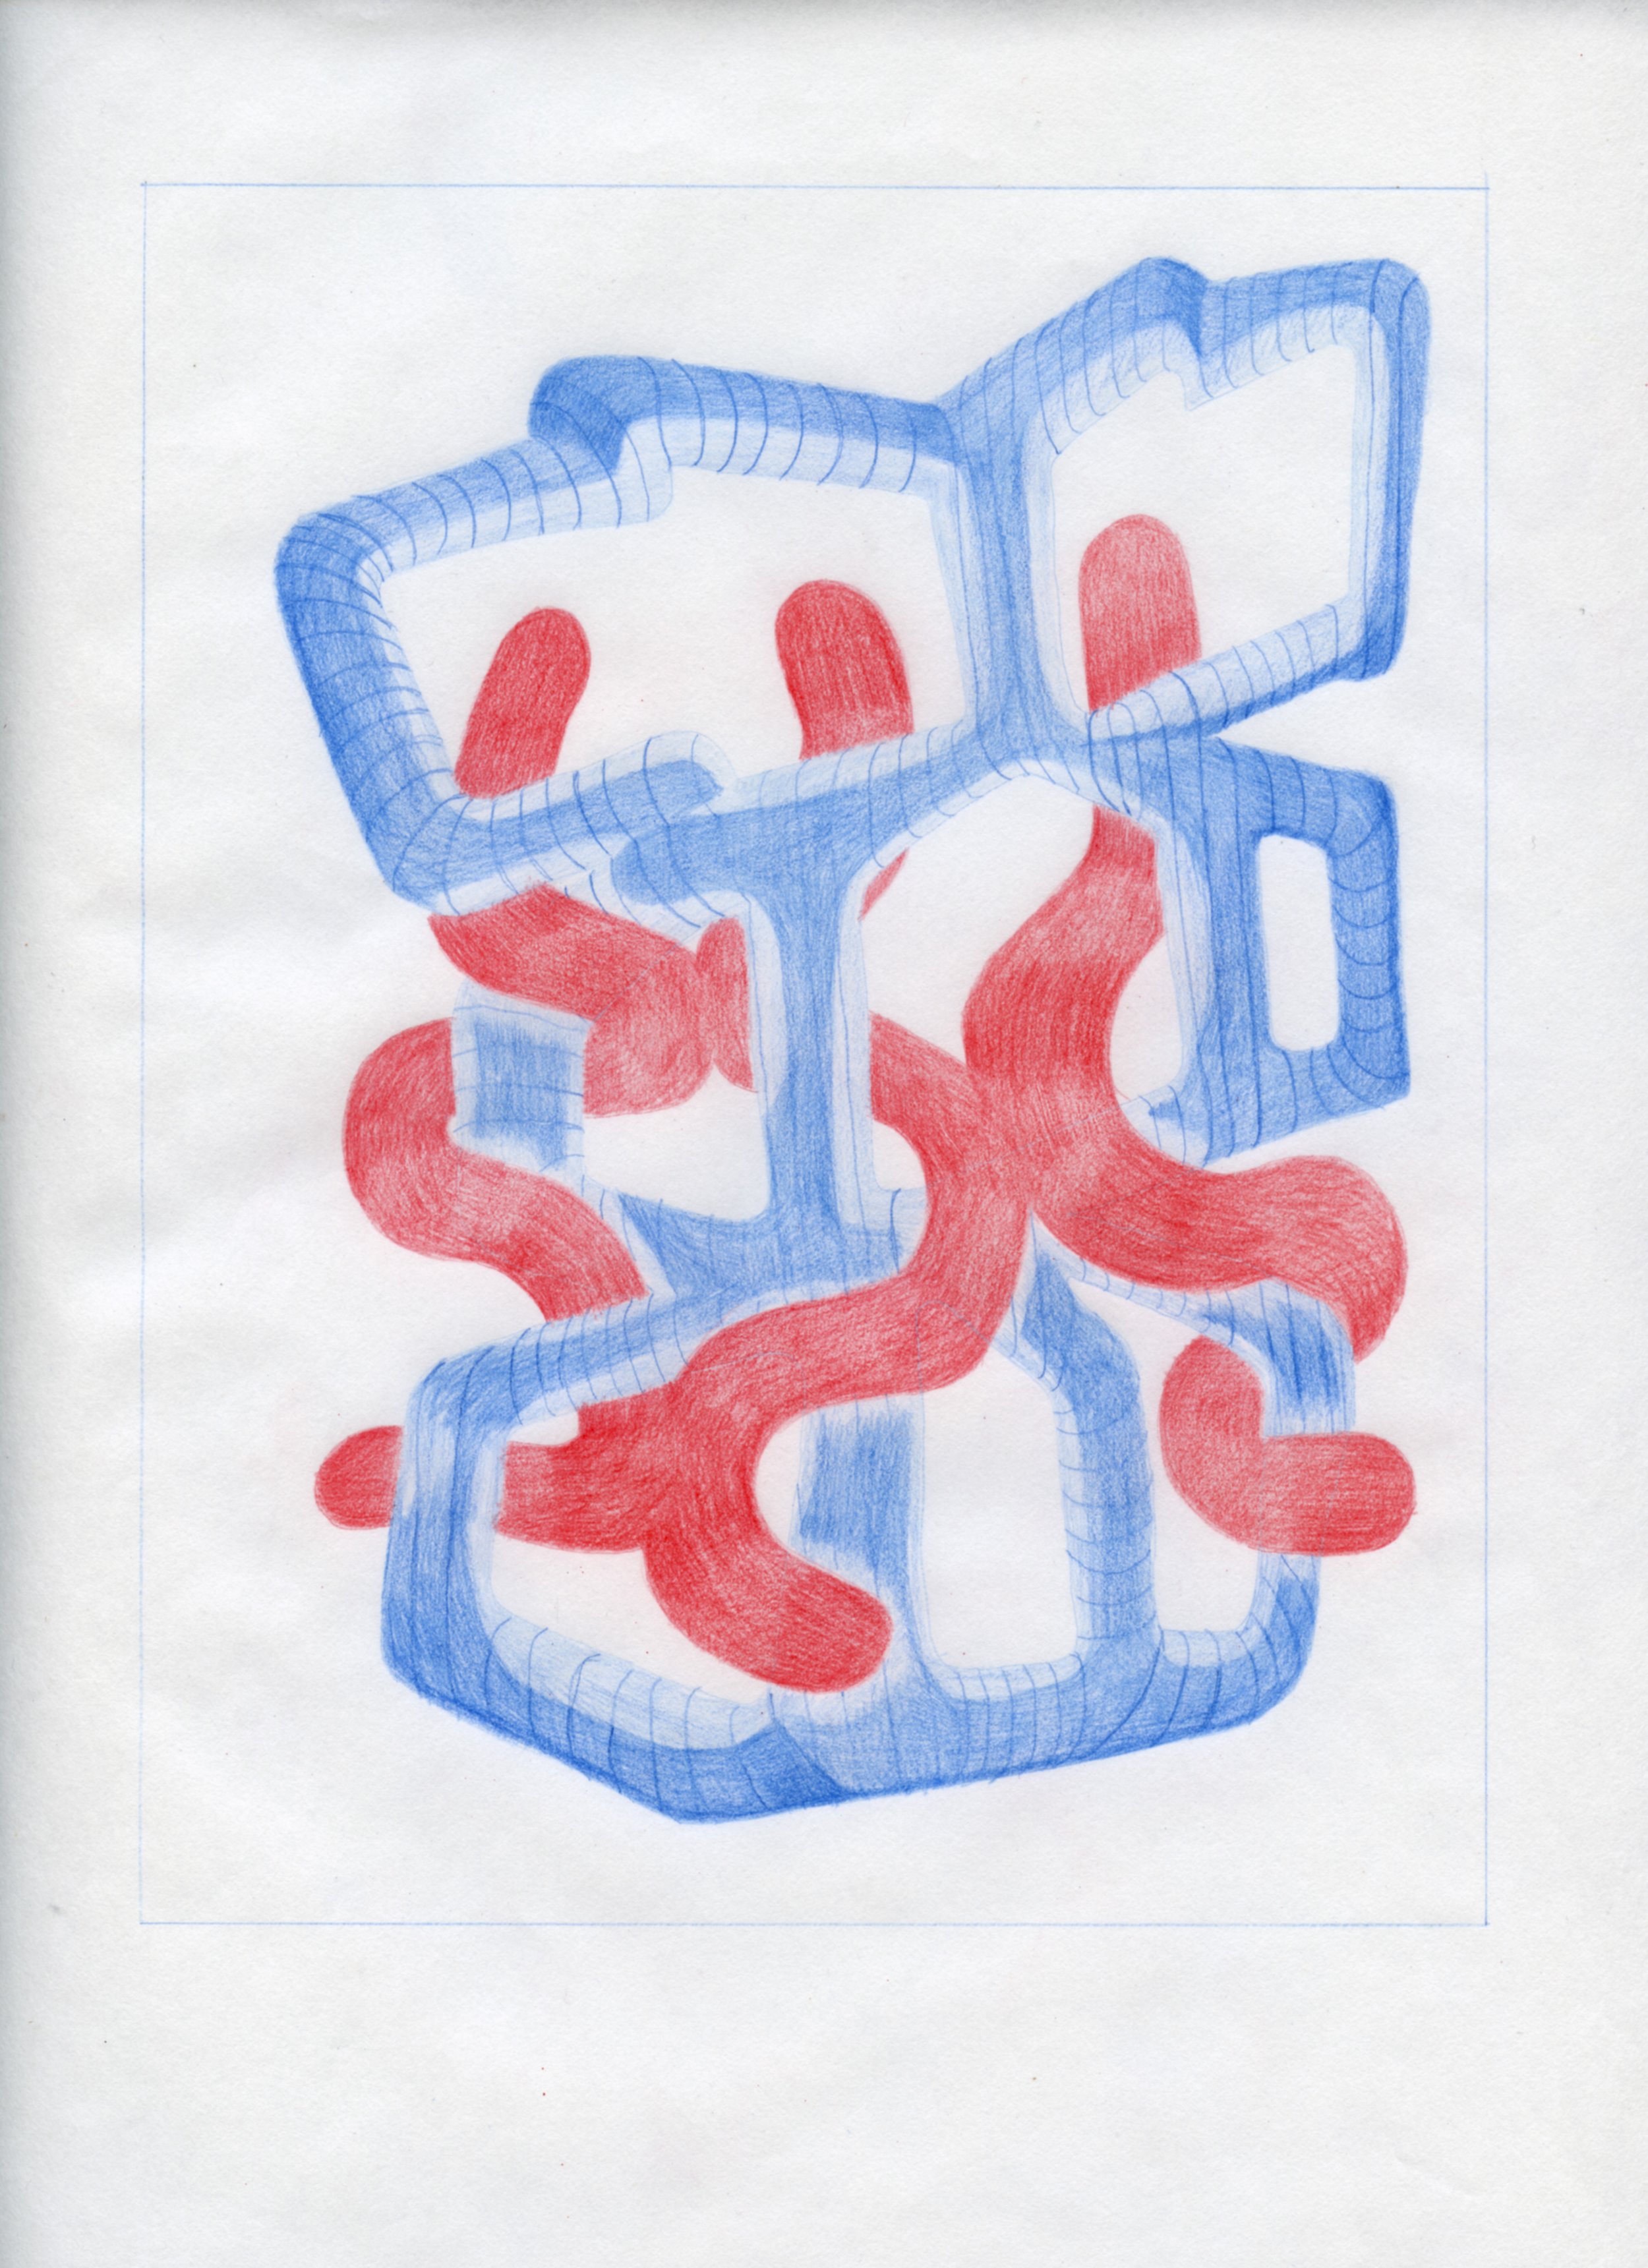  Workplace Drawing #25, 2021, Red and Blue Graphite on Bond Paper, 9”x 12”. 